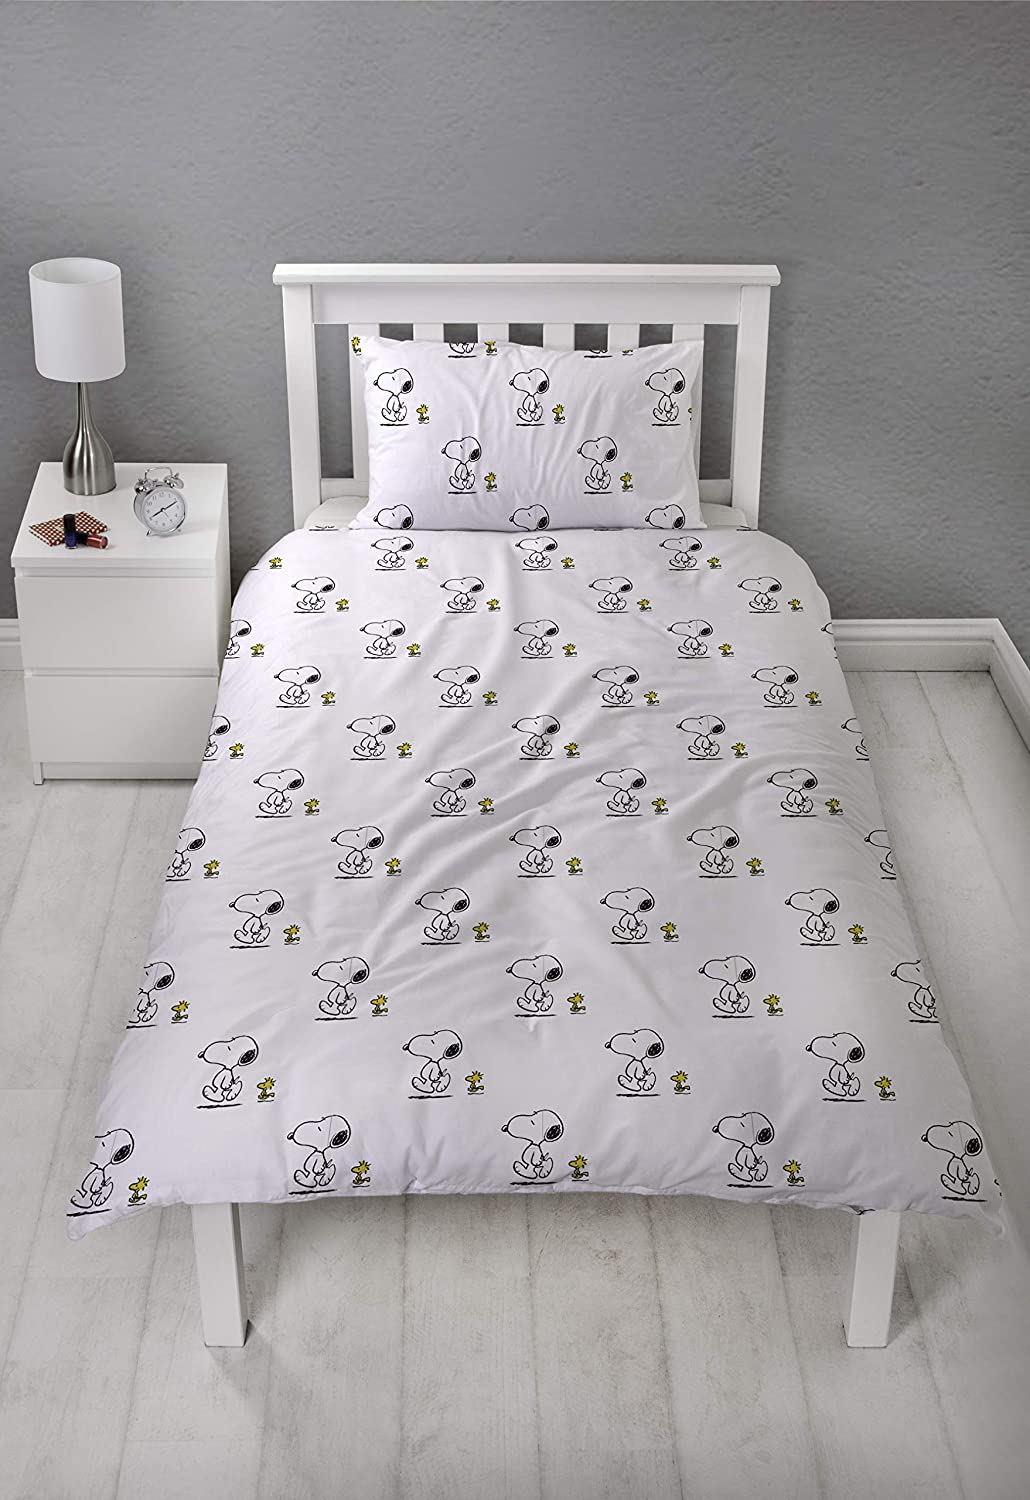 Single Bed Snoopy Peanuts Official Panel Duvet Cover "Reversible" Bedding Set